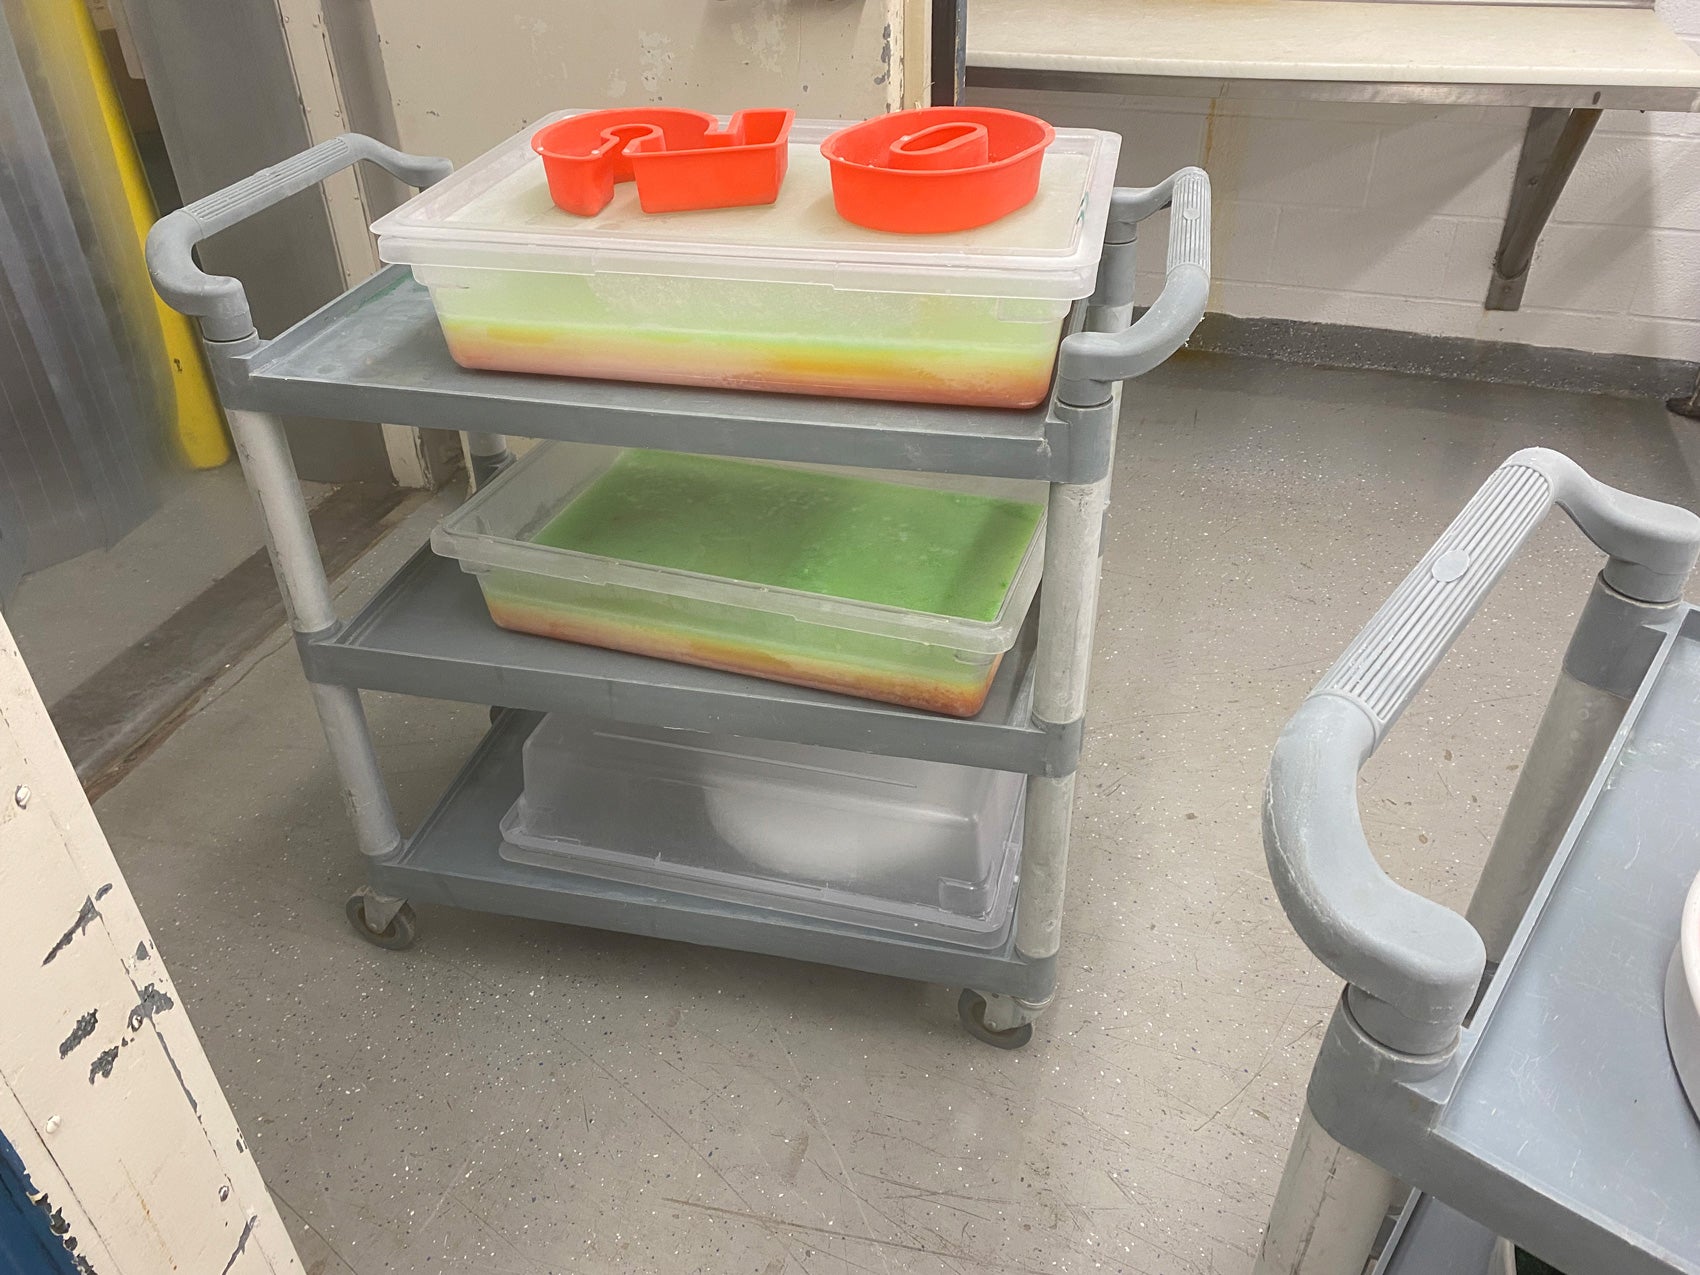 A three-tiered cart with rectangular plastic bins and a silicone number "50" mold filled with colorful frozen water and diluted fruit juice